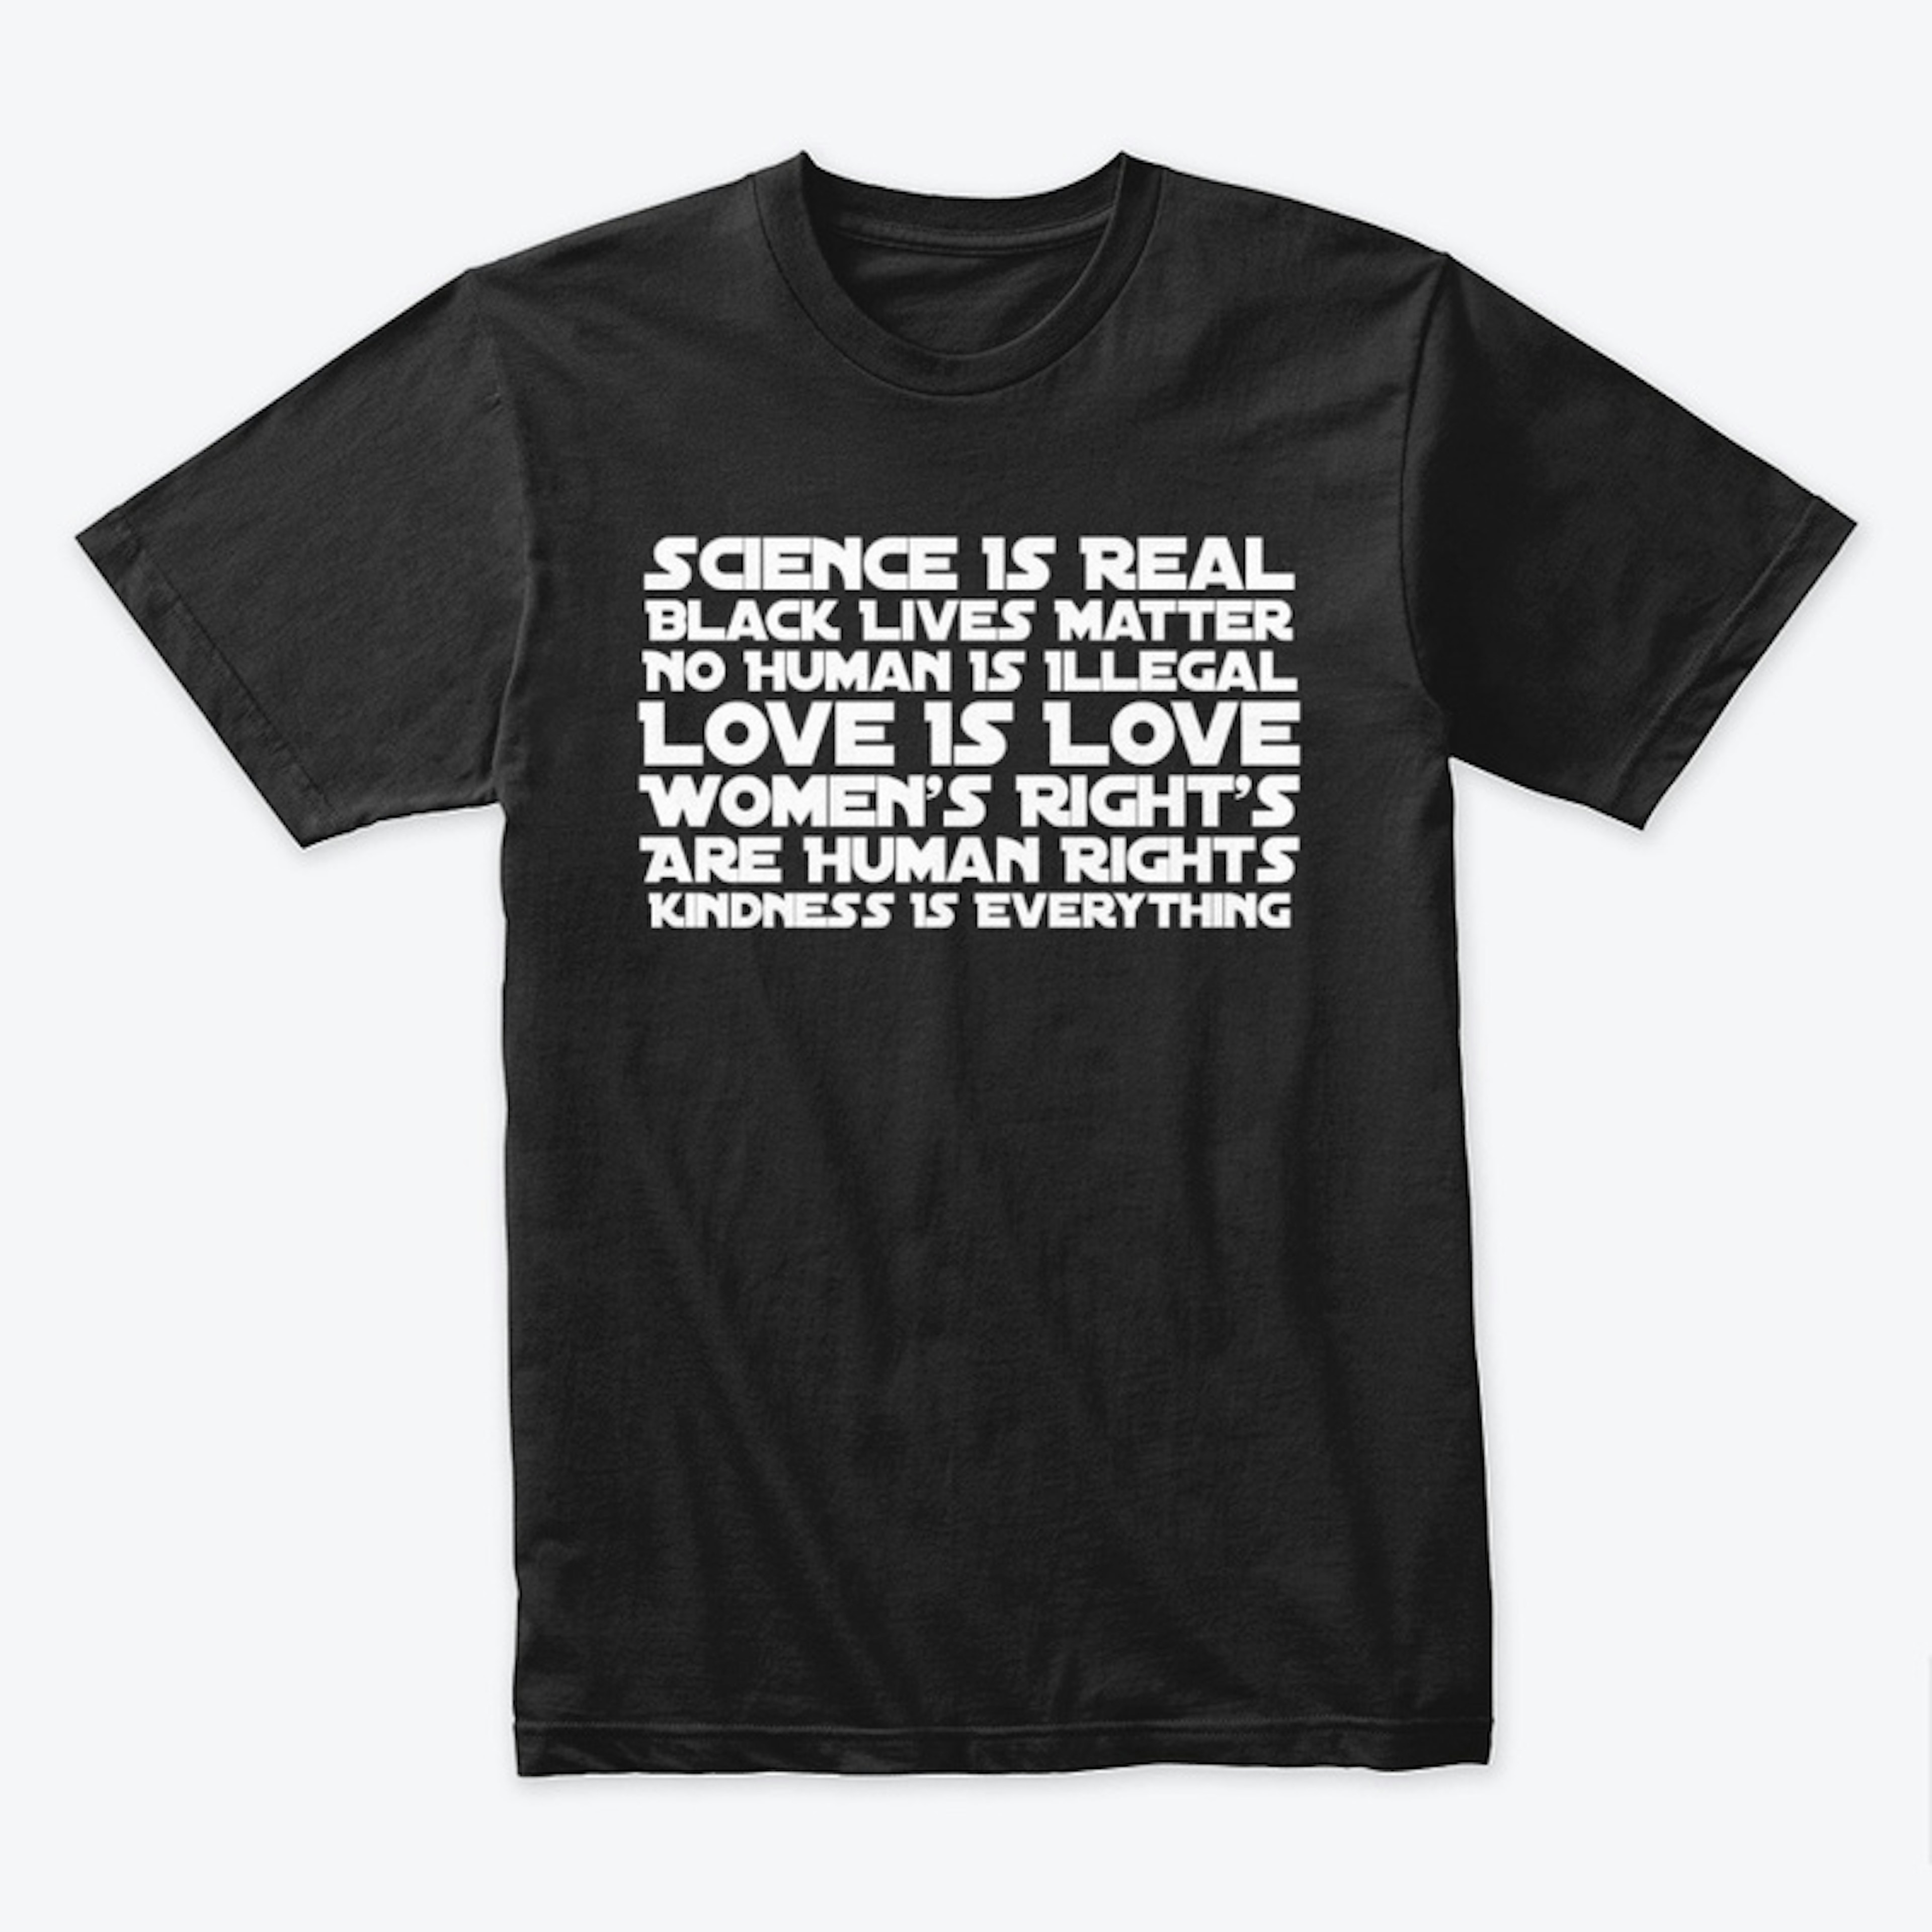 Kindness Is Everything - Men's T-Shirt